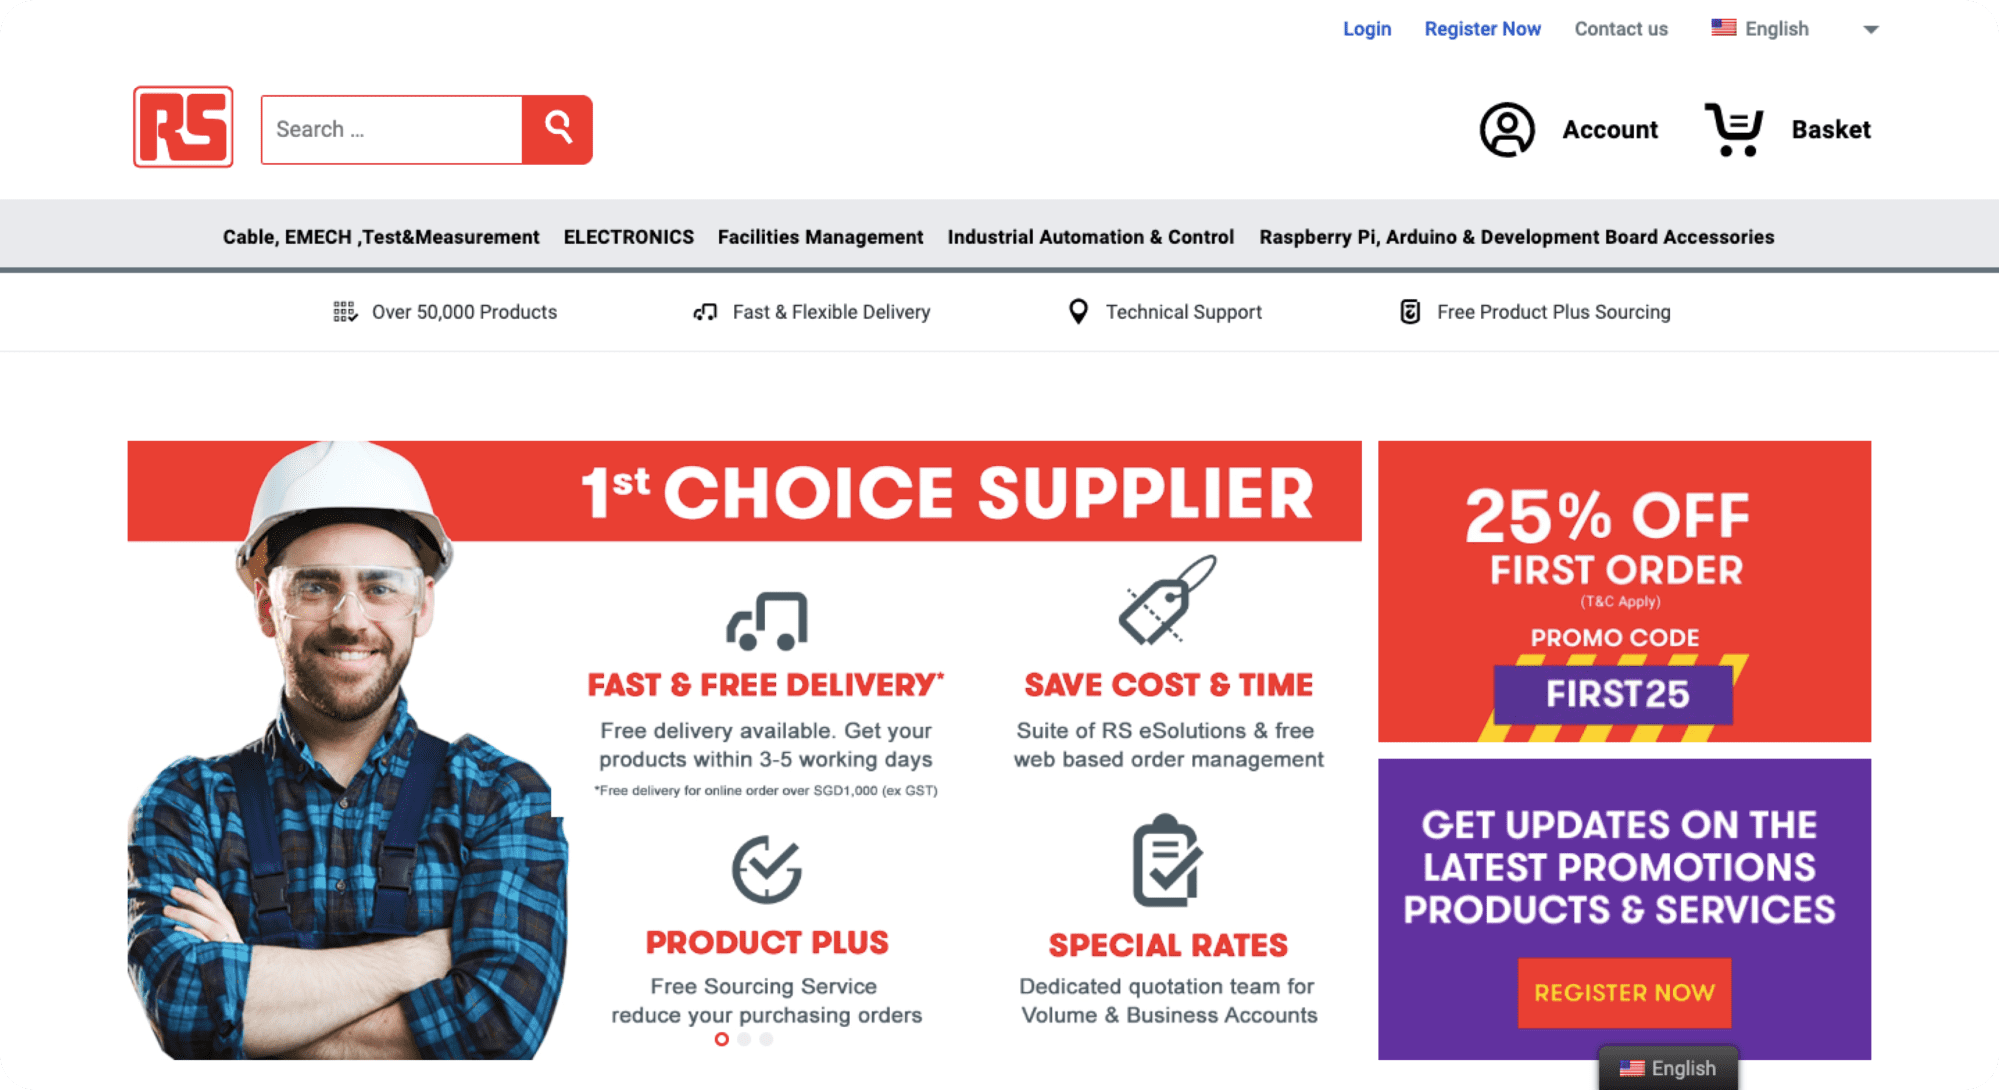 ITC helped RS Components improve its Southeast Asian eCommerce website using WooCommerce